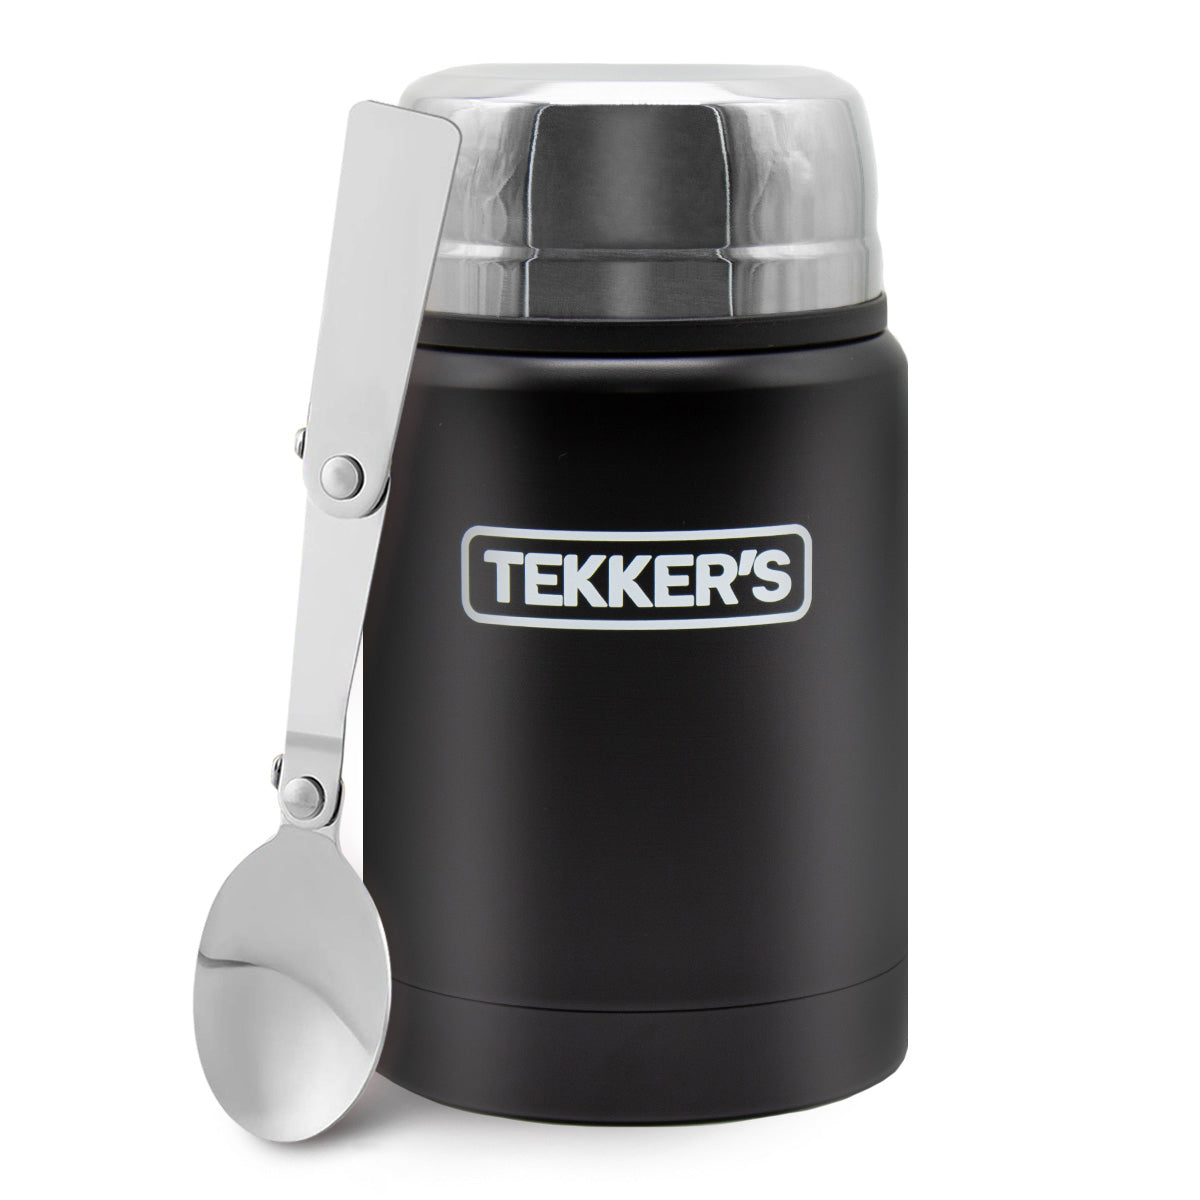  TEKKER'S Insulated Thermos Food Jar Lunch Thermos 17